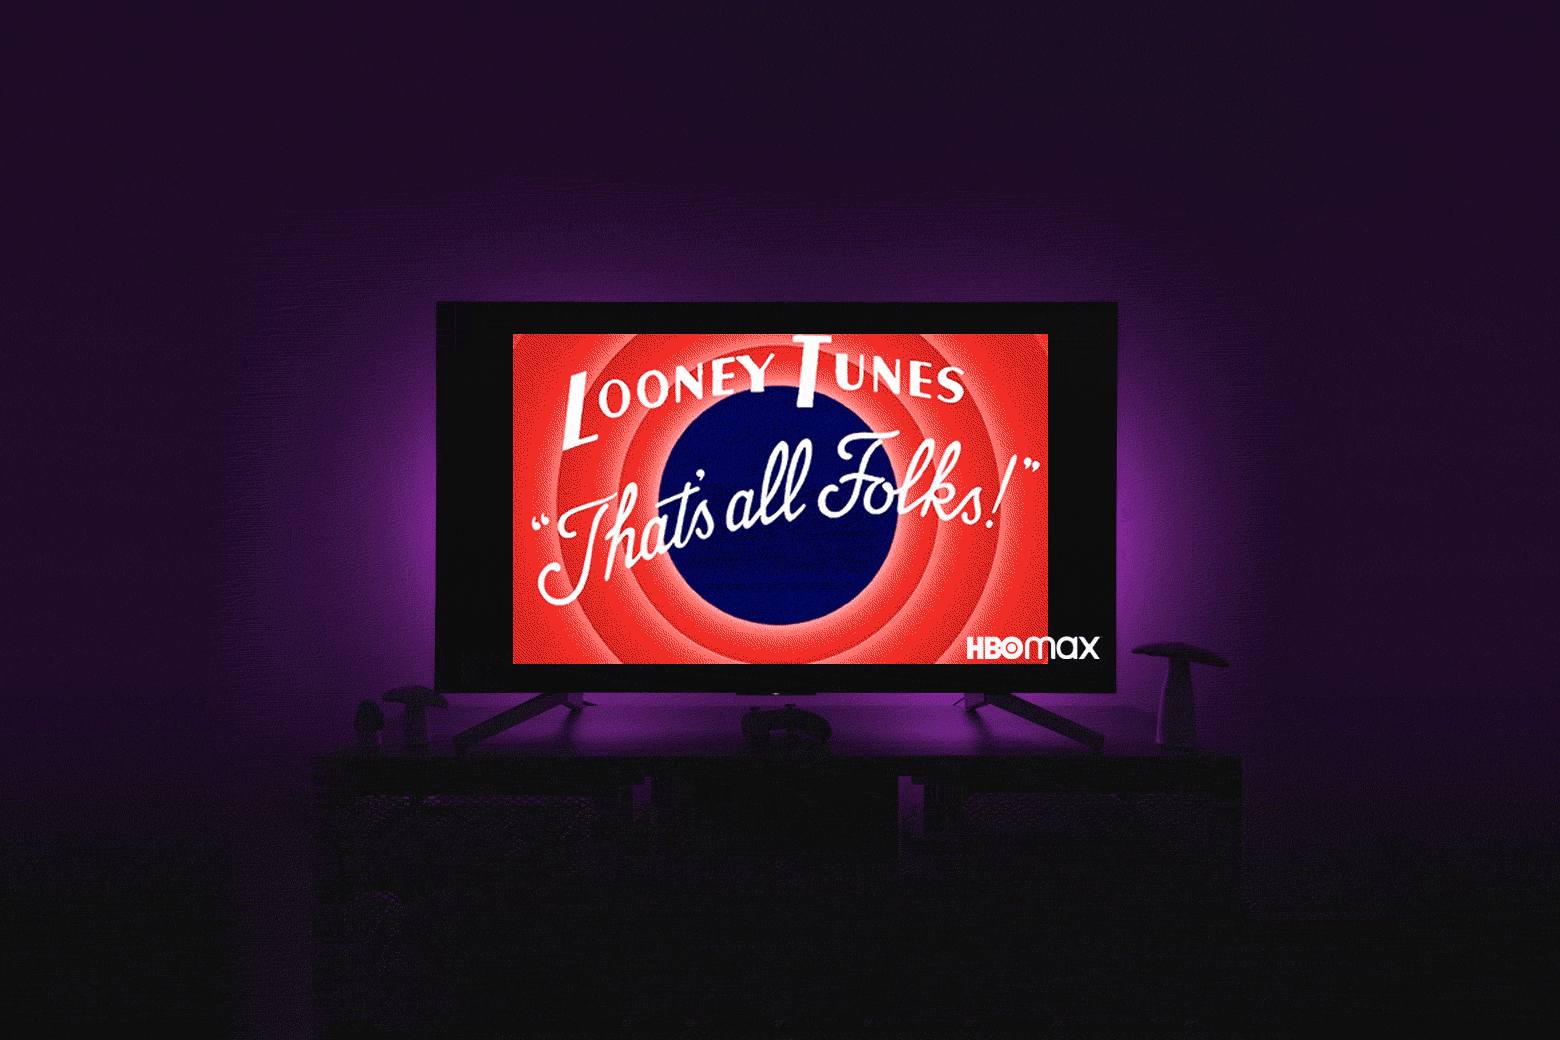  In a dark purple room, a TV screen with an HBO Max logo in the bottom right-hand corner plays "That's All Folks!" Looney Tunes outro.